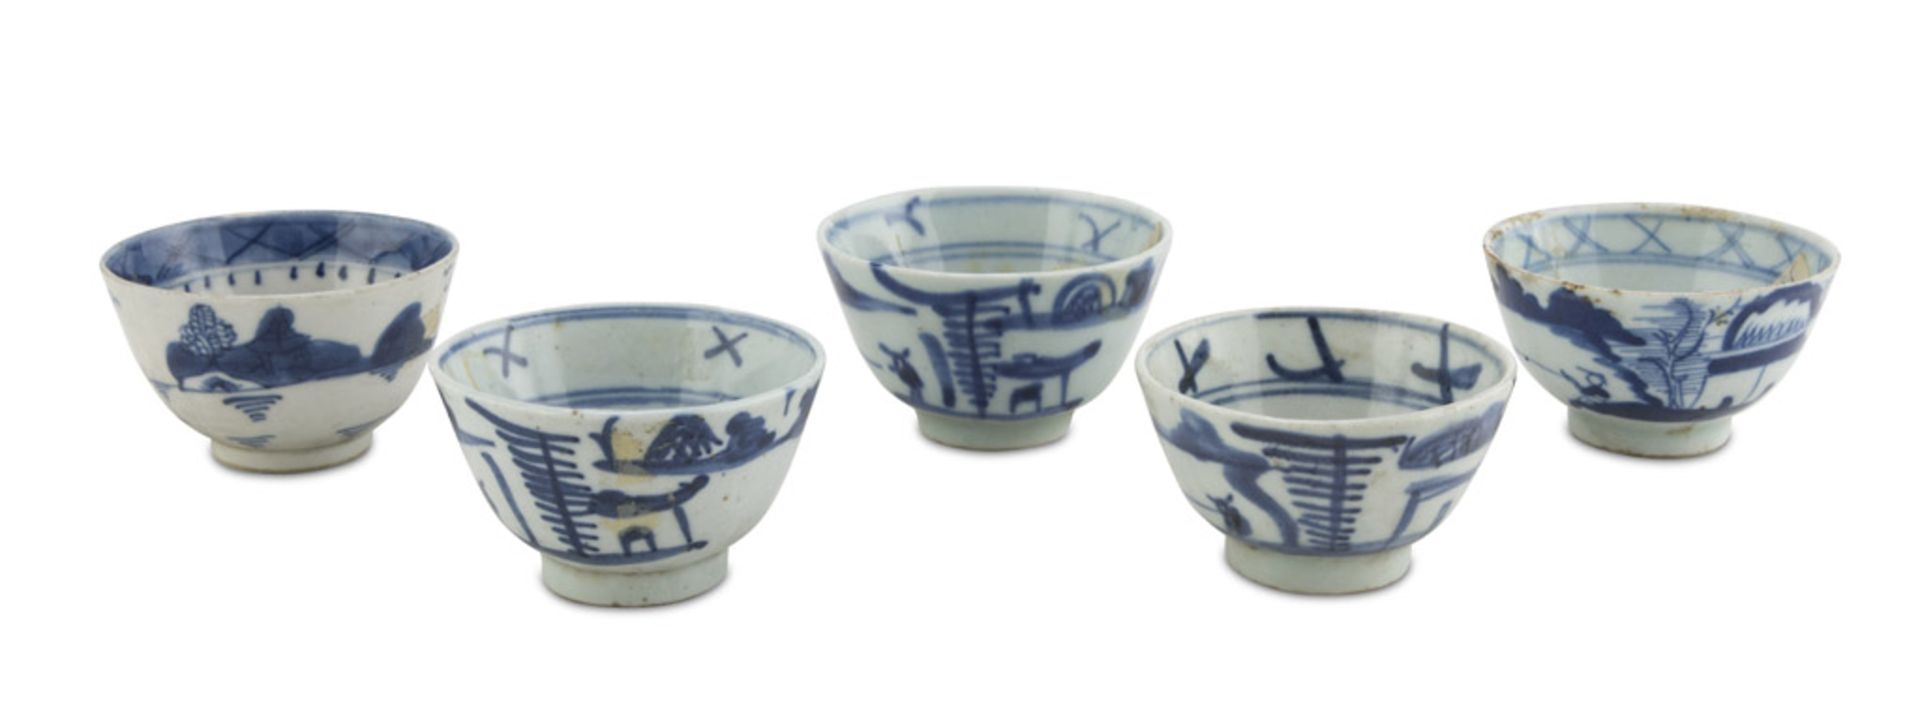 FIVE SMALL BOWLS, CHINA 19TH-20TH CENTURY decorated with landscapes, figures and boats. Measures cm.